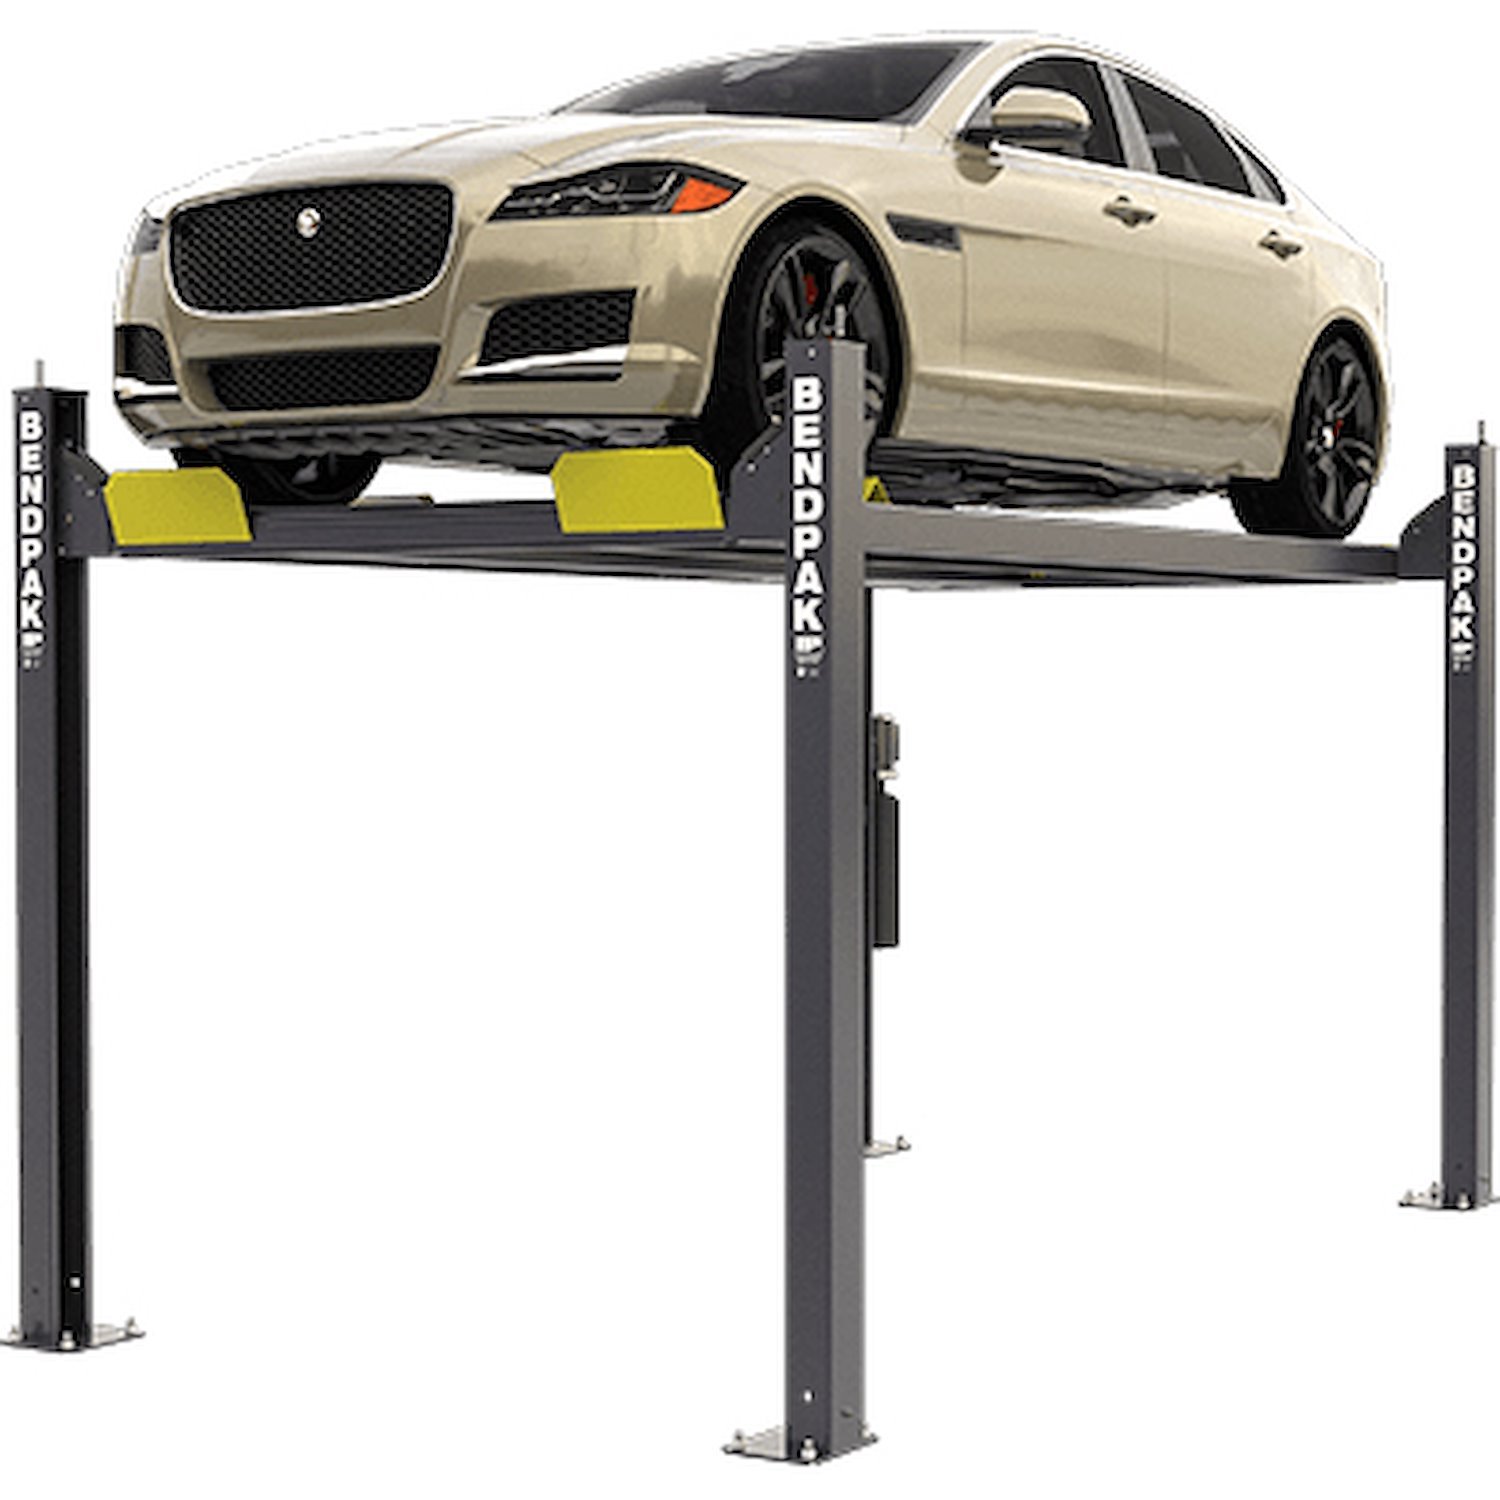 HD-7W Four-Post Vehicle Lift - Standard-Width, 7,000 lbs. Capacity, 82 in. Max Rise